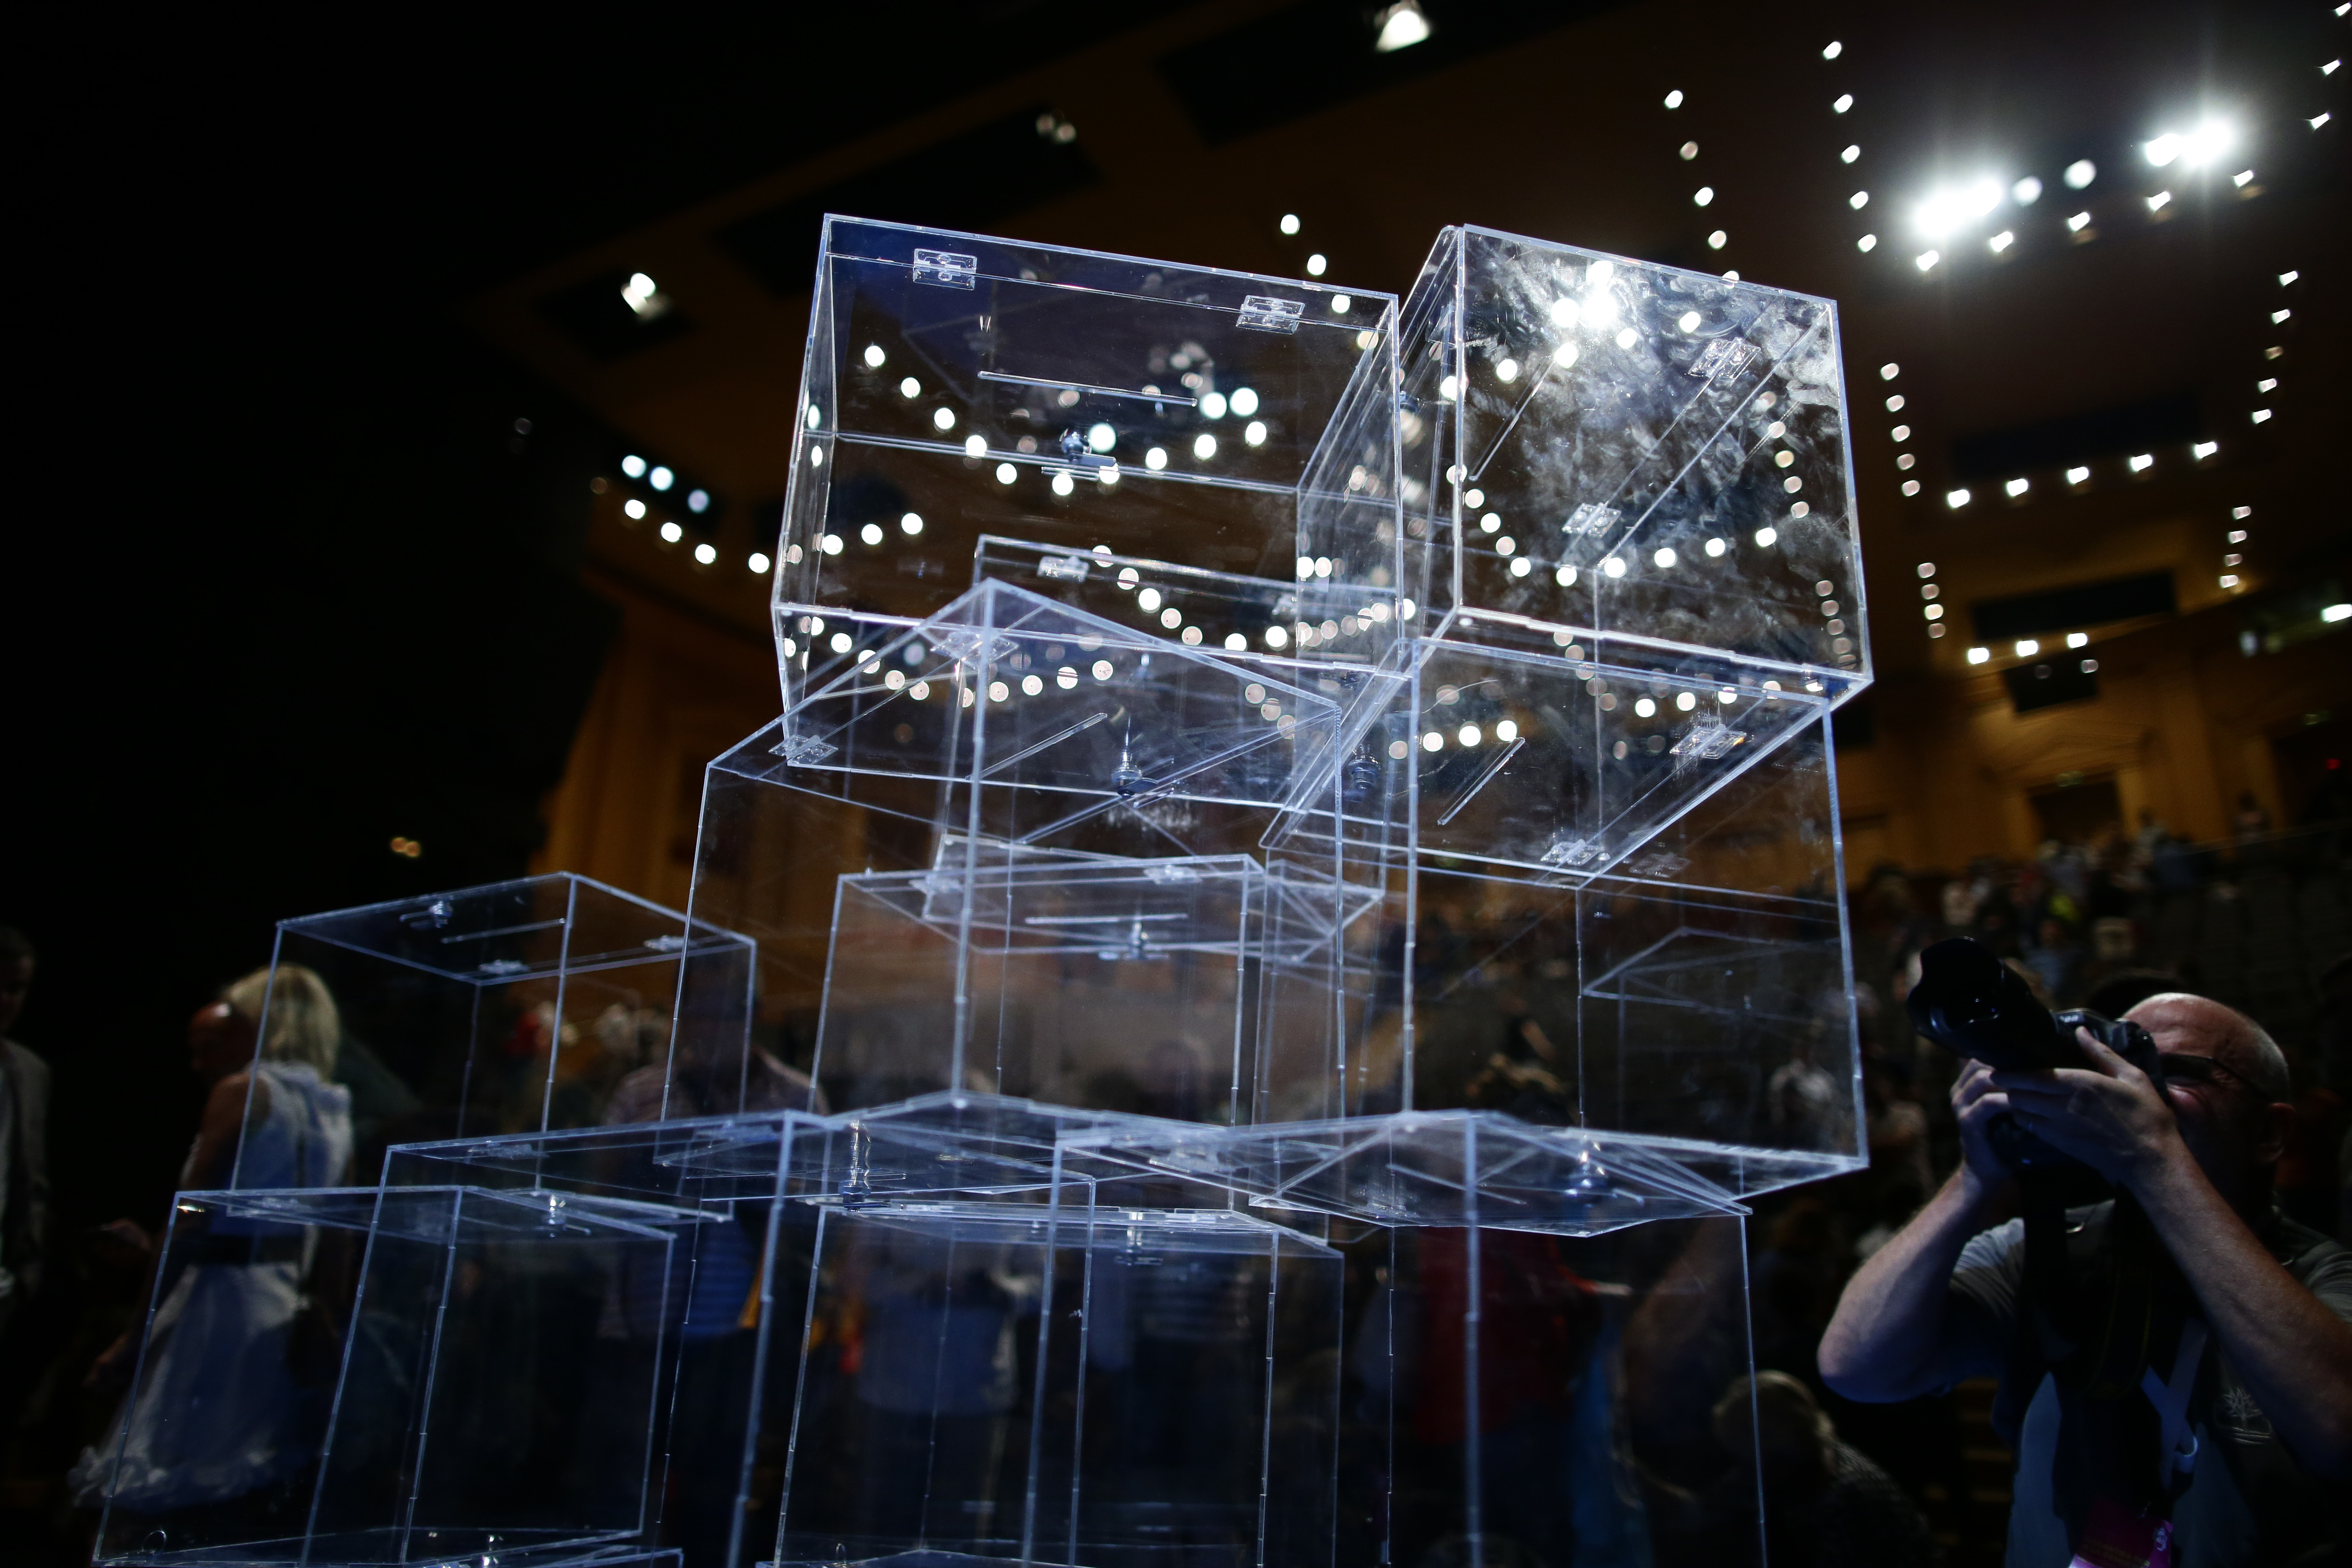 Ballot boxes during a pro-independence meeting in Barcelona, Spain, Tuesday, July, 4, 2017. Catalonia's regional government chose October 1st for a referendum on a split from Spain, stepping up the confrontation with central authorities who see the vote as illegal. (AP Photo/Manu Fernandez)